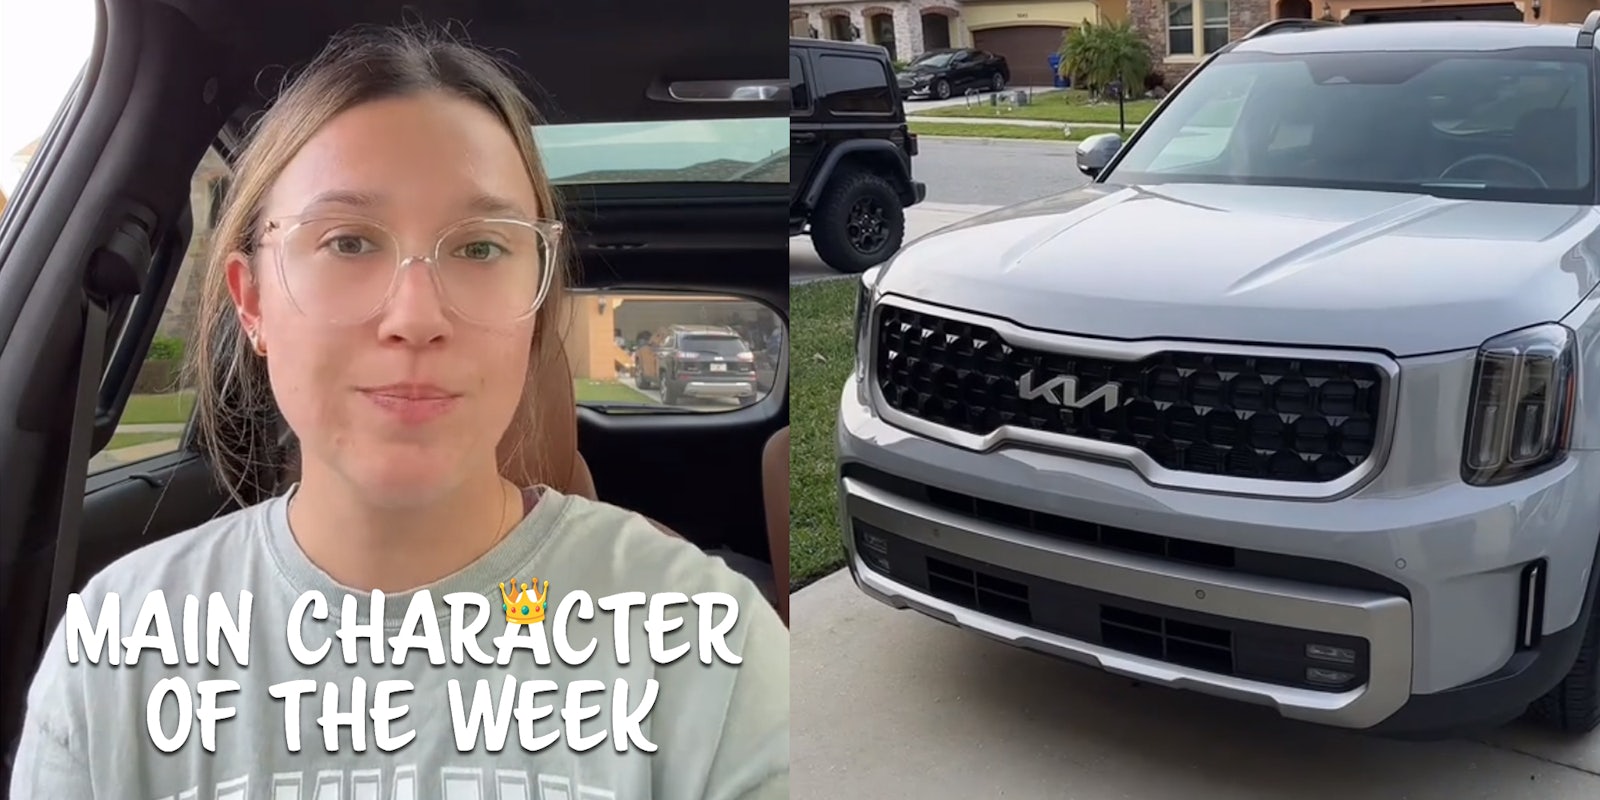 A person looking to the camera next to a Kia vehicle. There is text that says 'Main Character of the Week' in a Daily Dot newsletter font.